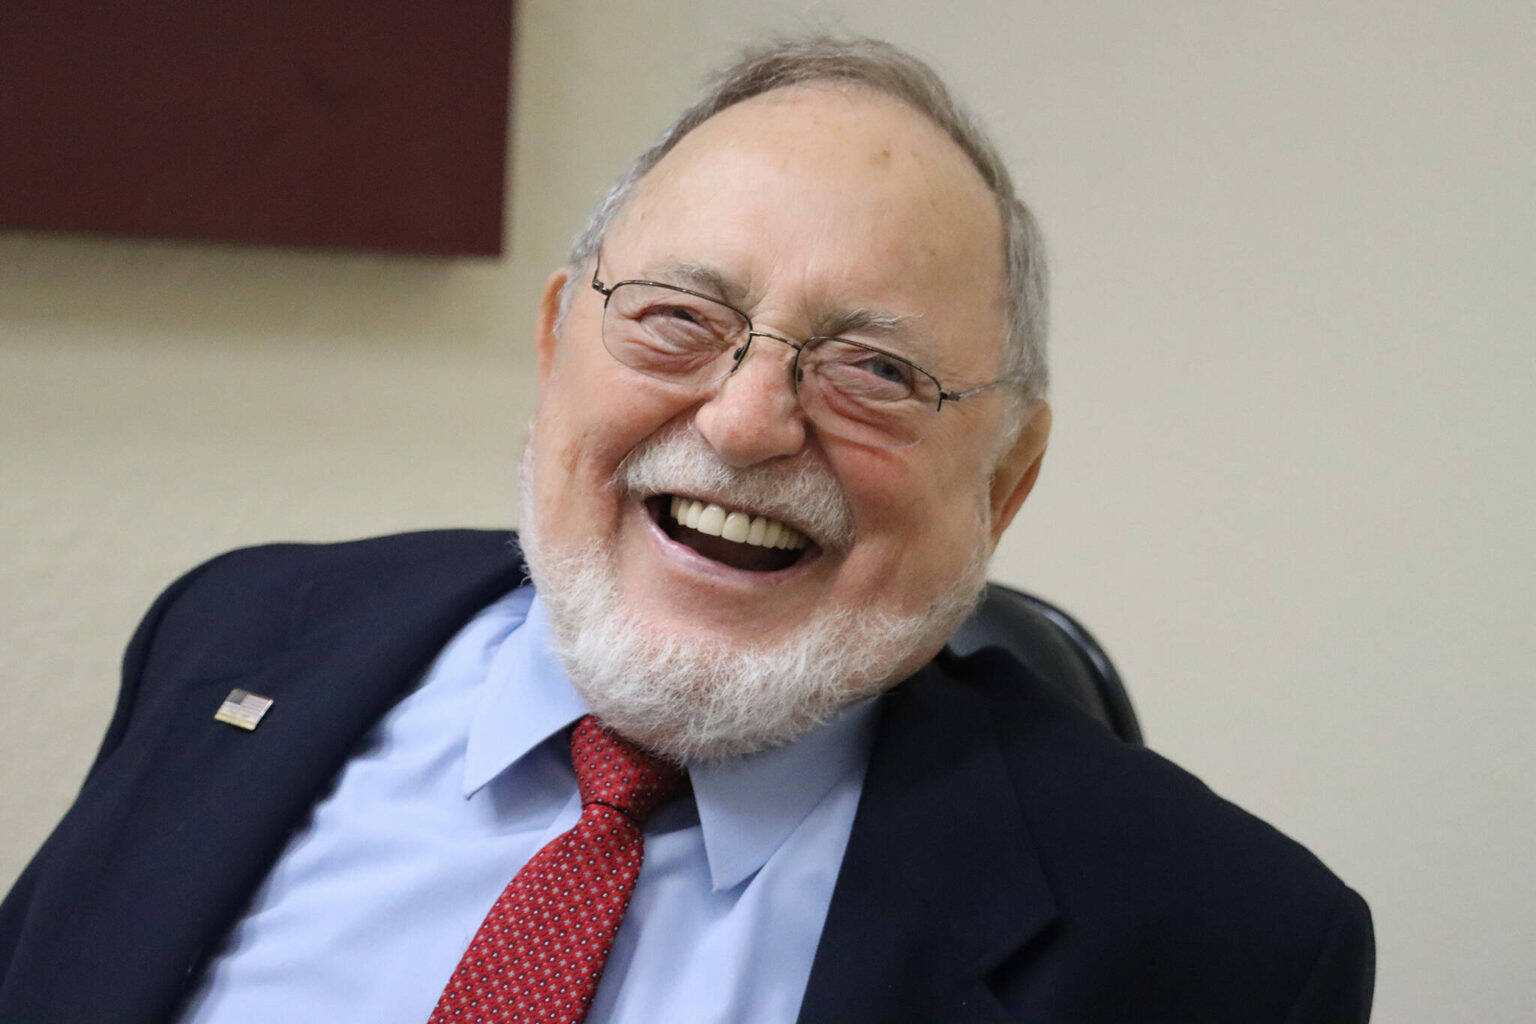 Ben Hohenstatt / Juneau Empire File 
Rep. Don Young smiles during a sit-down in the Juneau Empire’s offices last June. Young died on Friday, according to the longtime U.S. representative’s office.